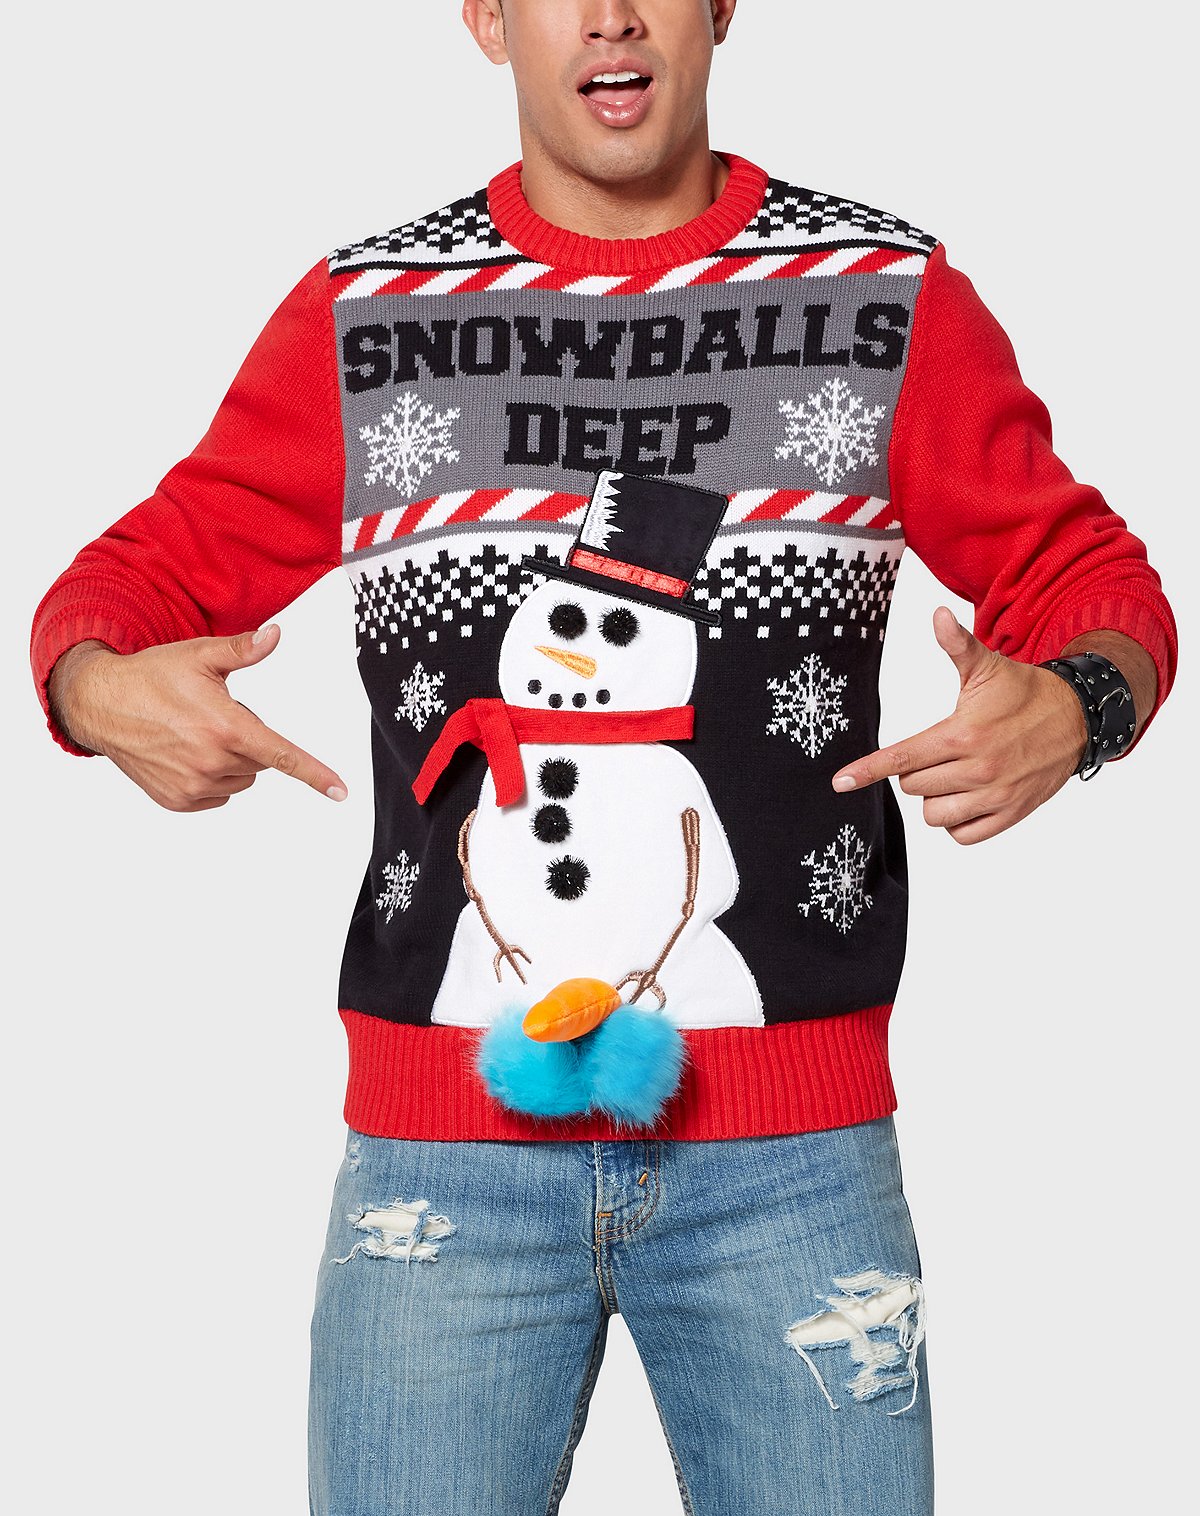 Top 10 Ugly Christmas Sweaters 2021 - The Inspo Spot